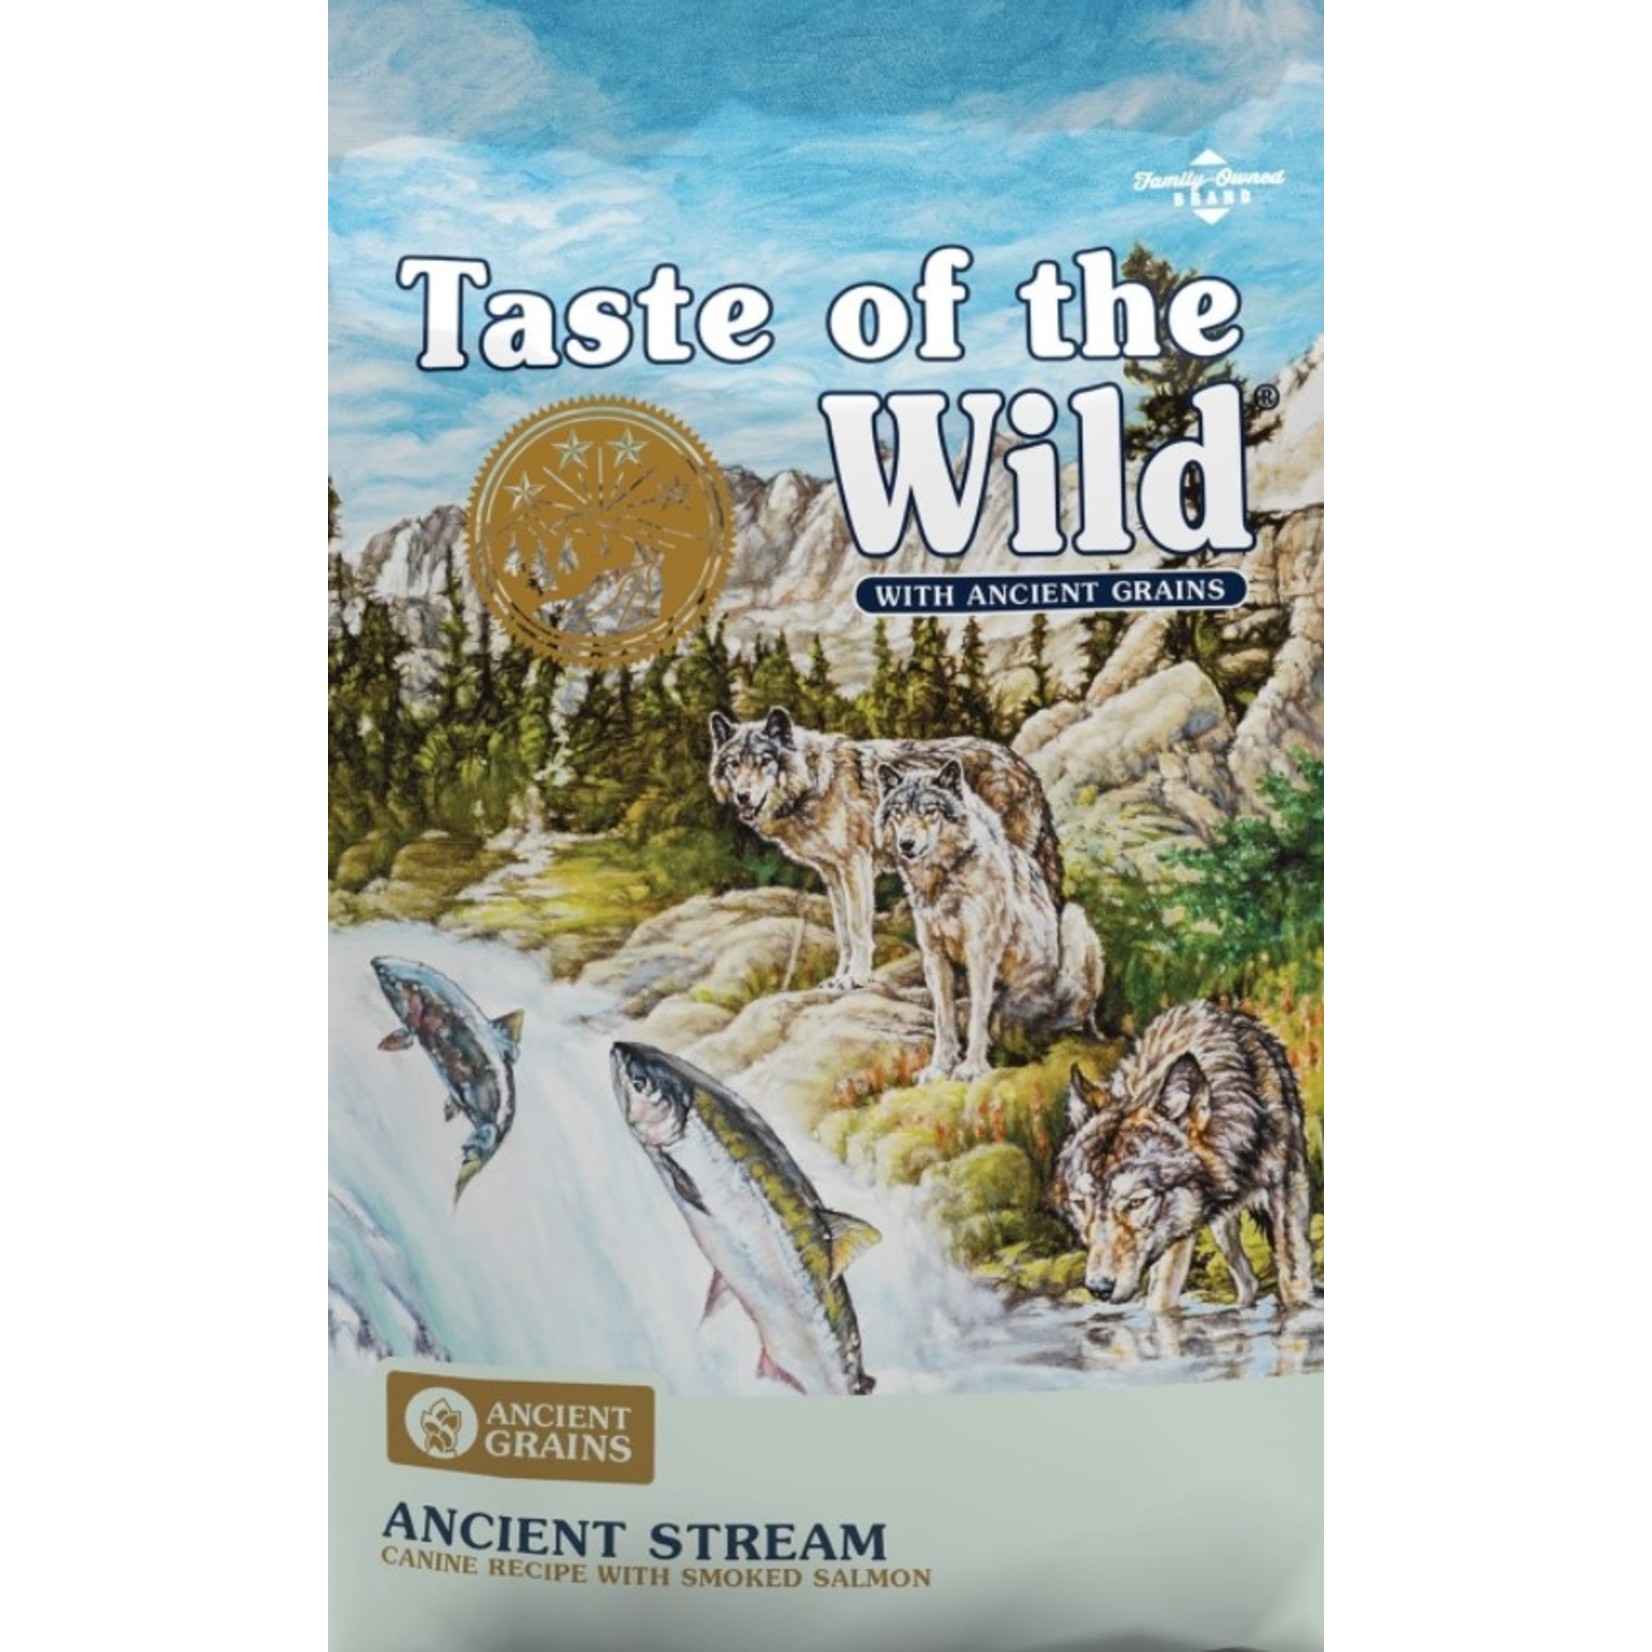 TOW TASTE OF THE WILD. Ancient Grains Ancient Stream 14LB